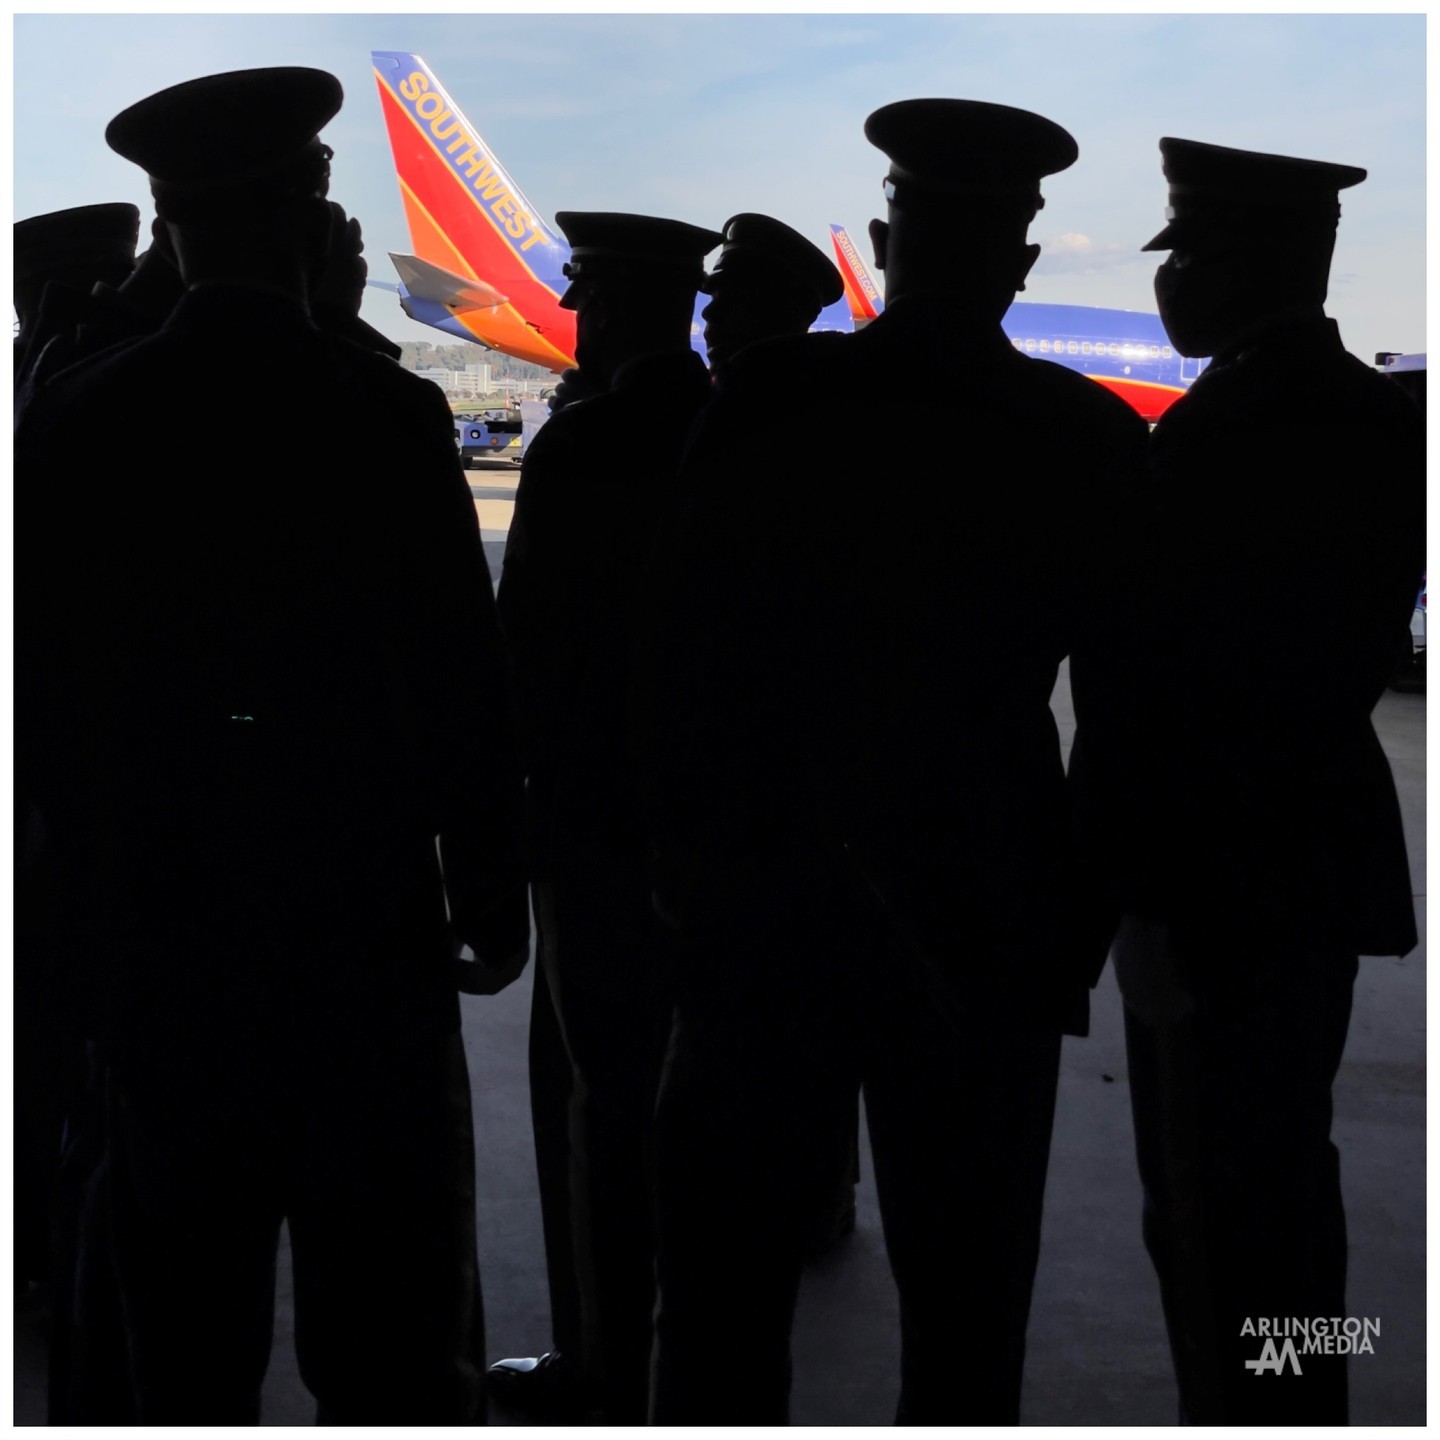 Members of Hotel Company of the US Army Old Guard await the dignified arrival of veteran remains on the Tarmac this past Friday.

While everyone is looking out at the aircraft turning into the bay, the soldiers standing in salute, police cars flashing their red, white, and blue display, and sometimes even crossed streams of water from fire trucks at the ready, one of the most compelling parts of these experiences, is turning the opposite direction, looking back, and seeing the many faces pressed against the glass in reverence. 

Capturing moments like this on site is not new for our @arlingtonmedia team, but we are always honored to have the opportunity to do so for a military family.  Thank you.
@southwestair 
@reagan_airport 
@usarmyoldguard